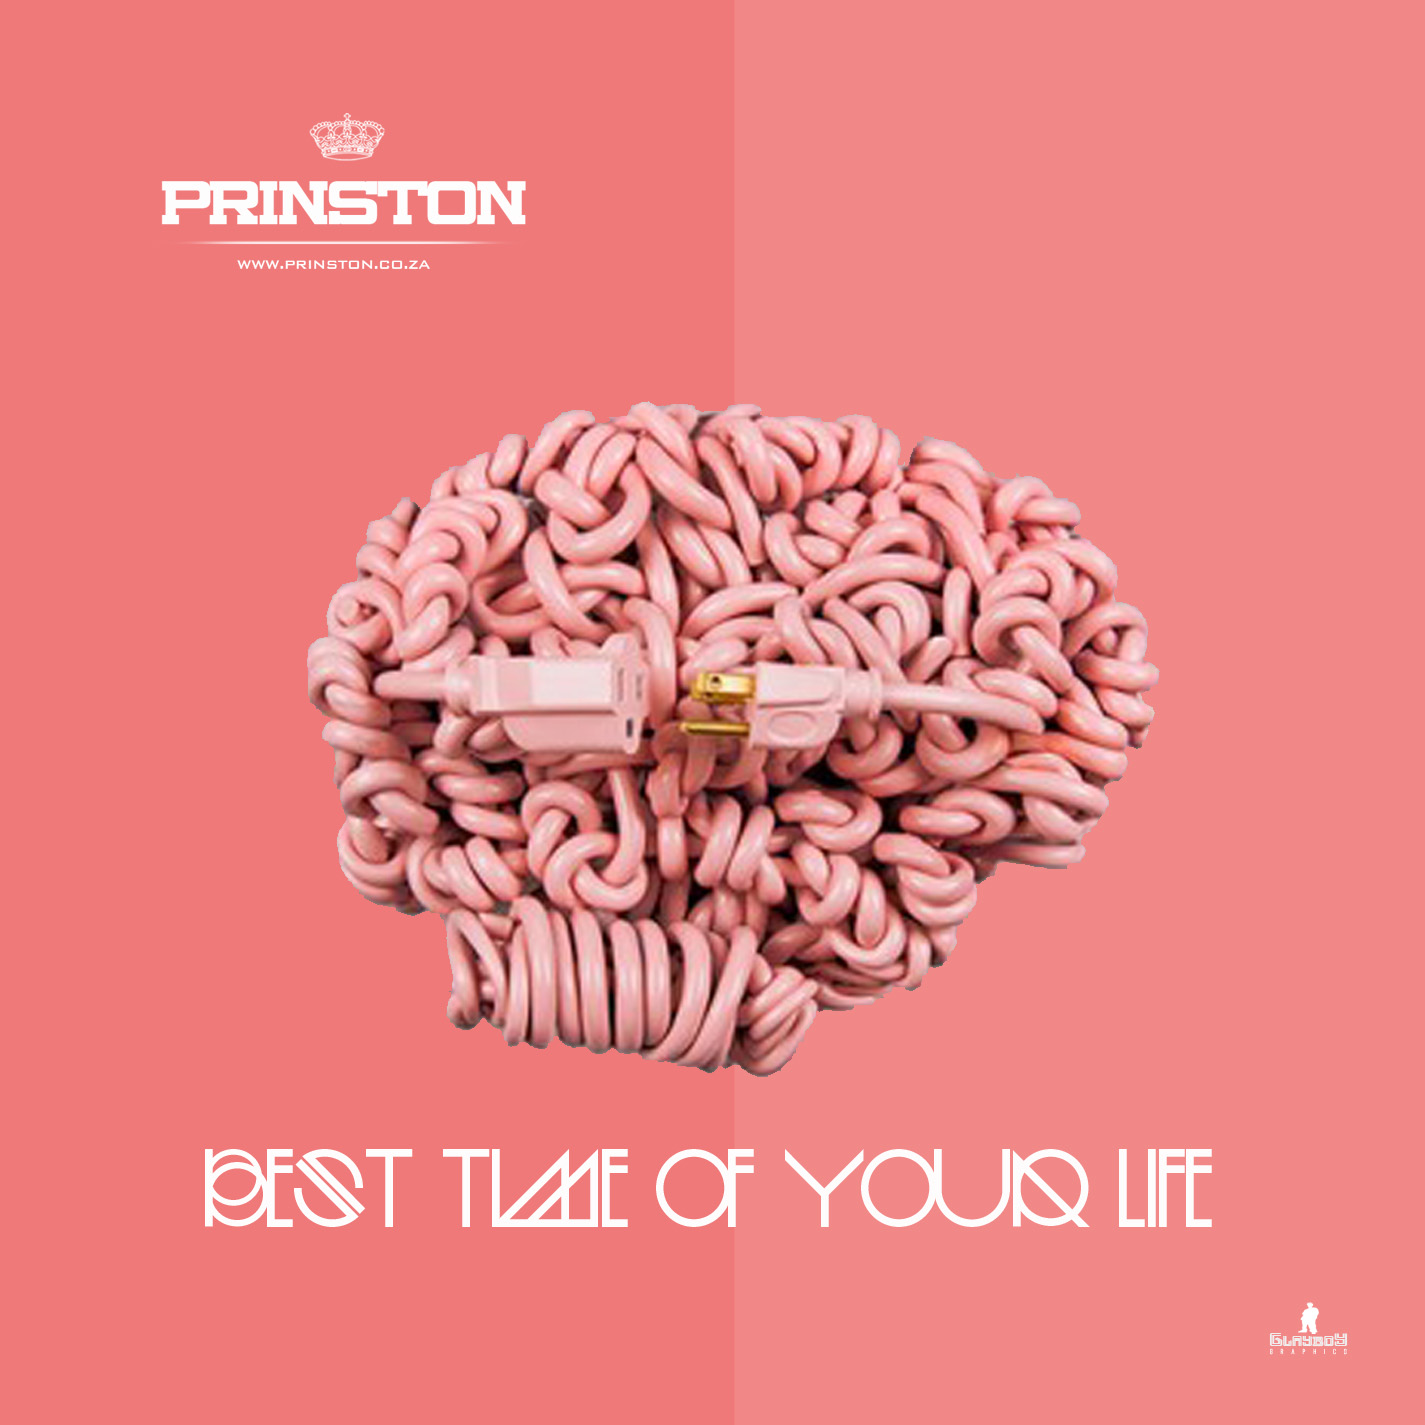 Free DOWNLOAD : Best Time Of Your Life